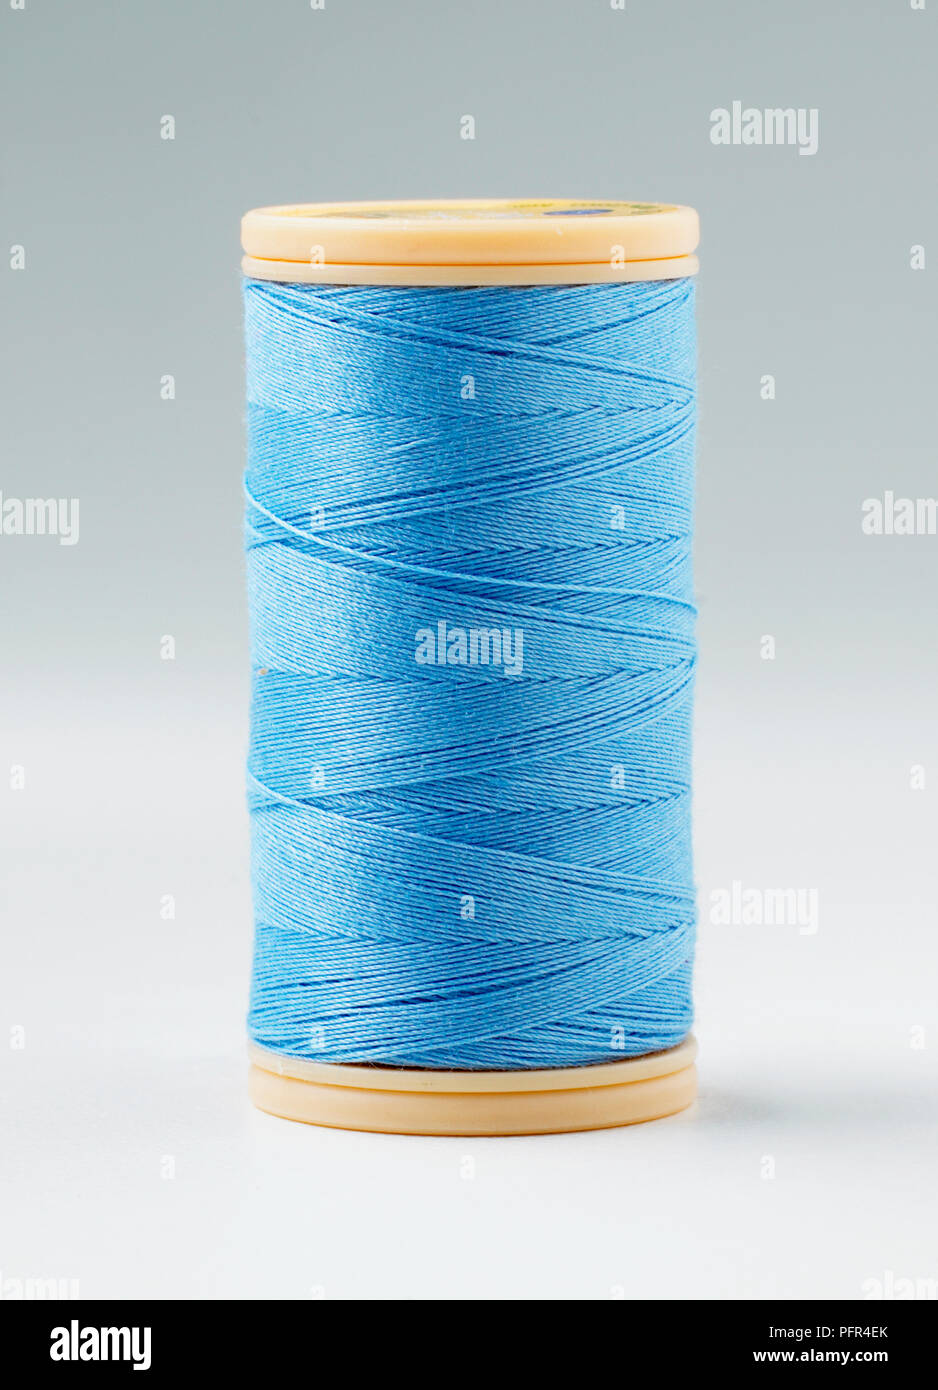 Reel of blue cotton sewing thread Stock Photo